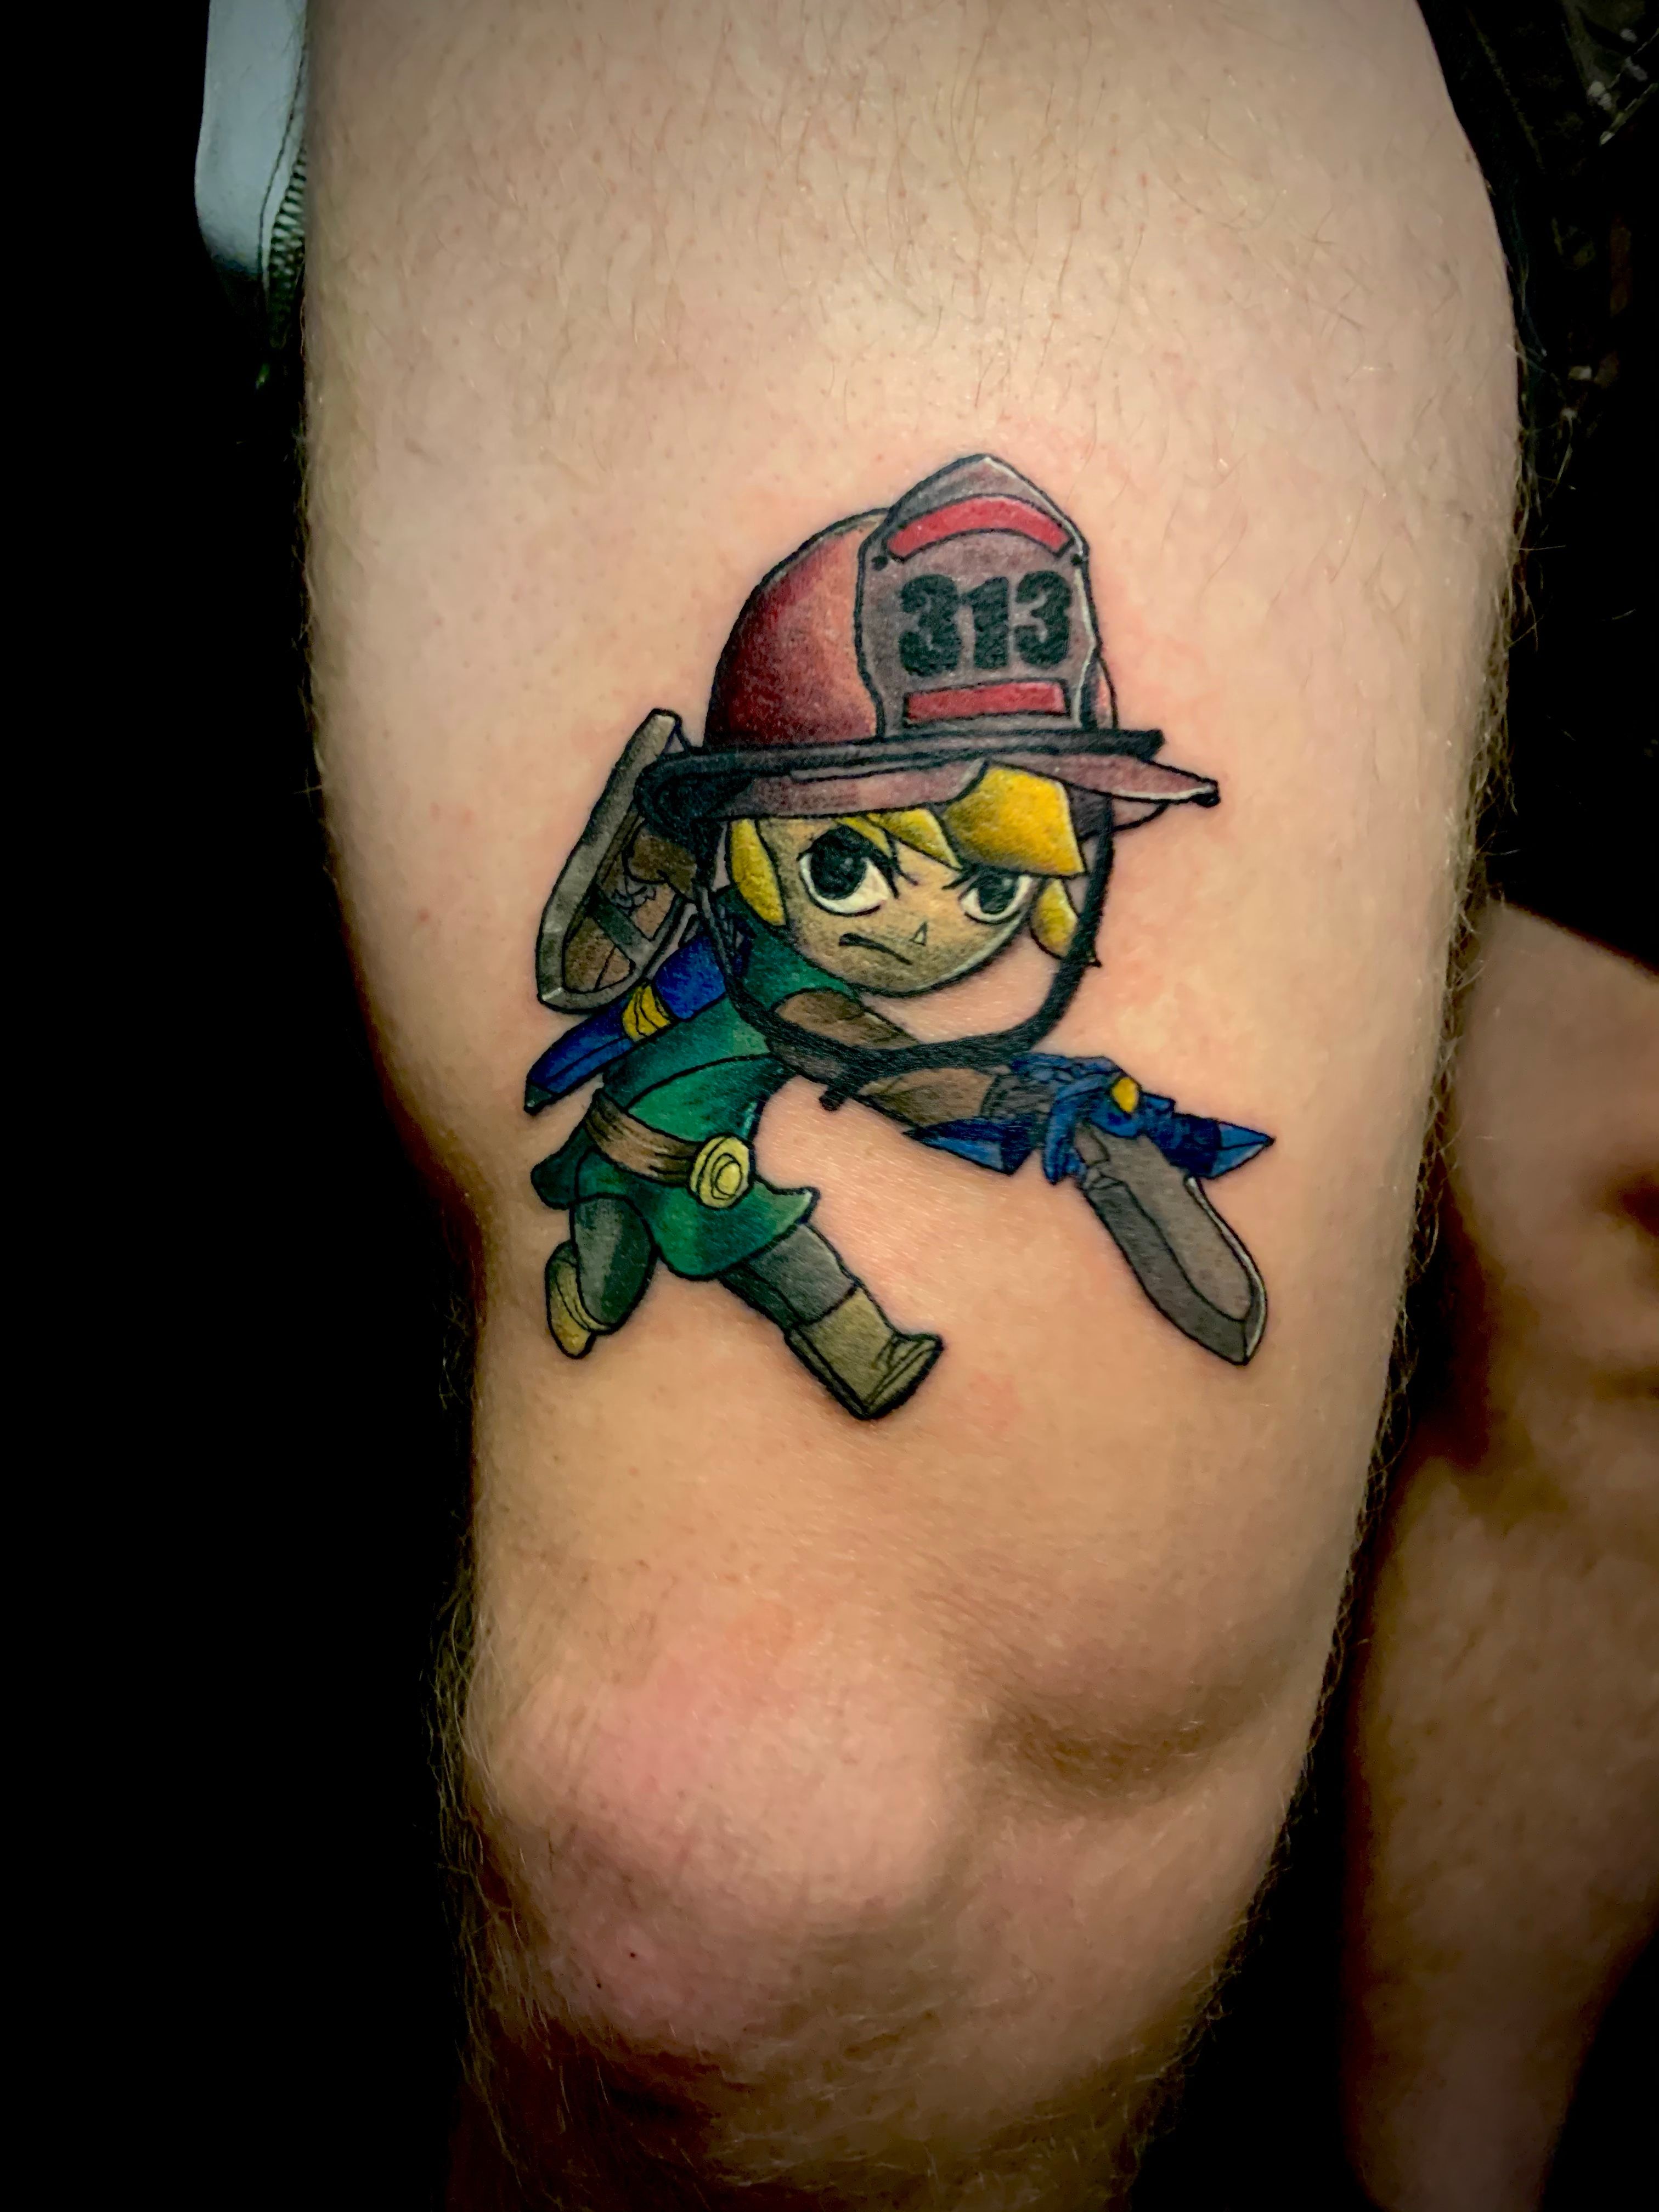 I Thought You Guys Would Appreciate My First Tattoo  rsmashbros